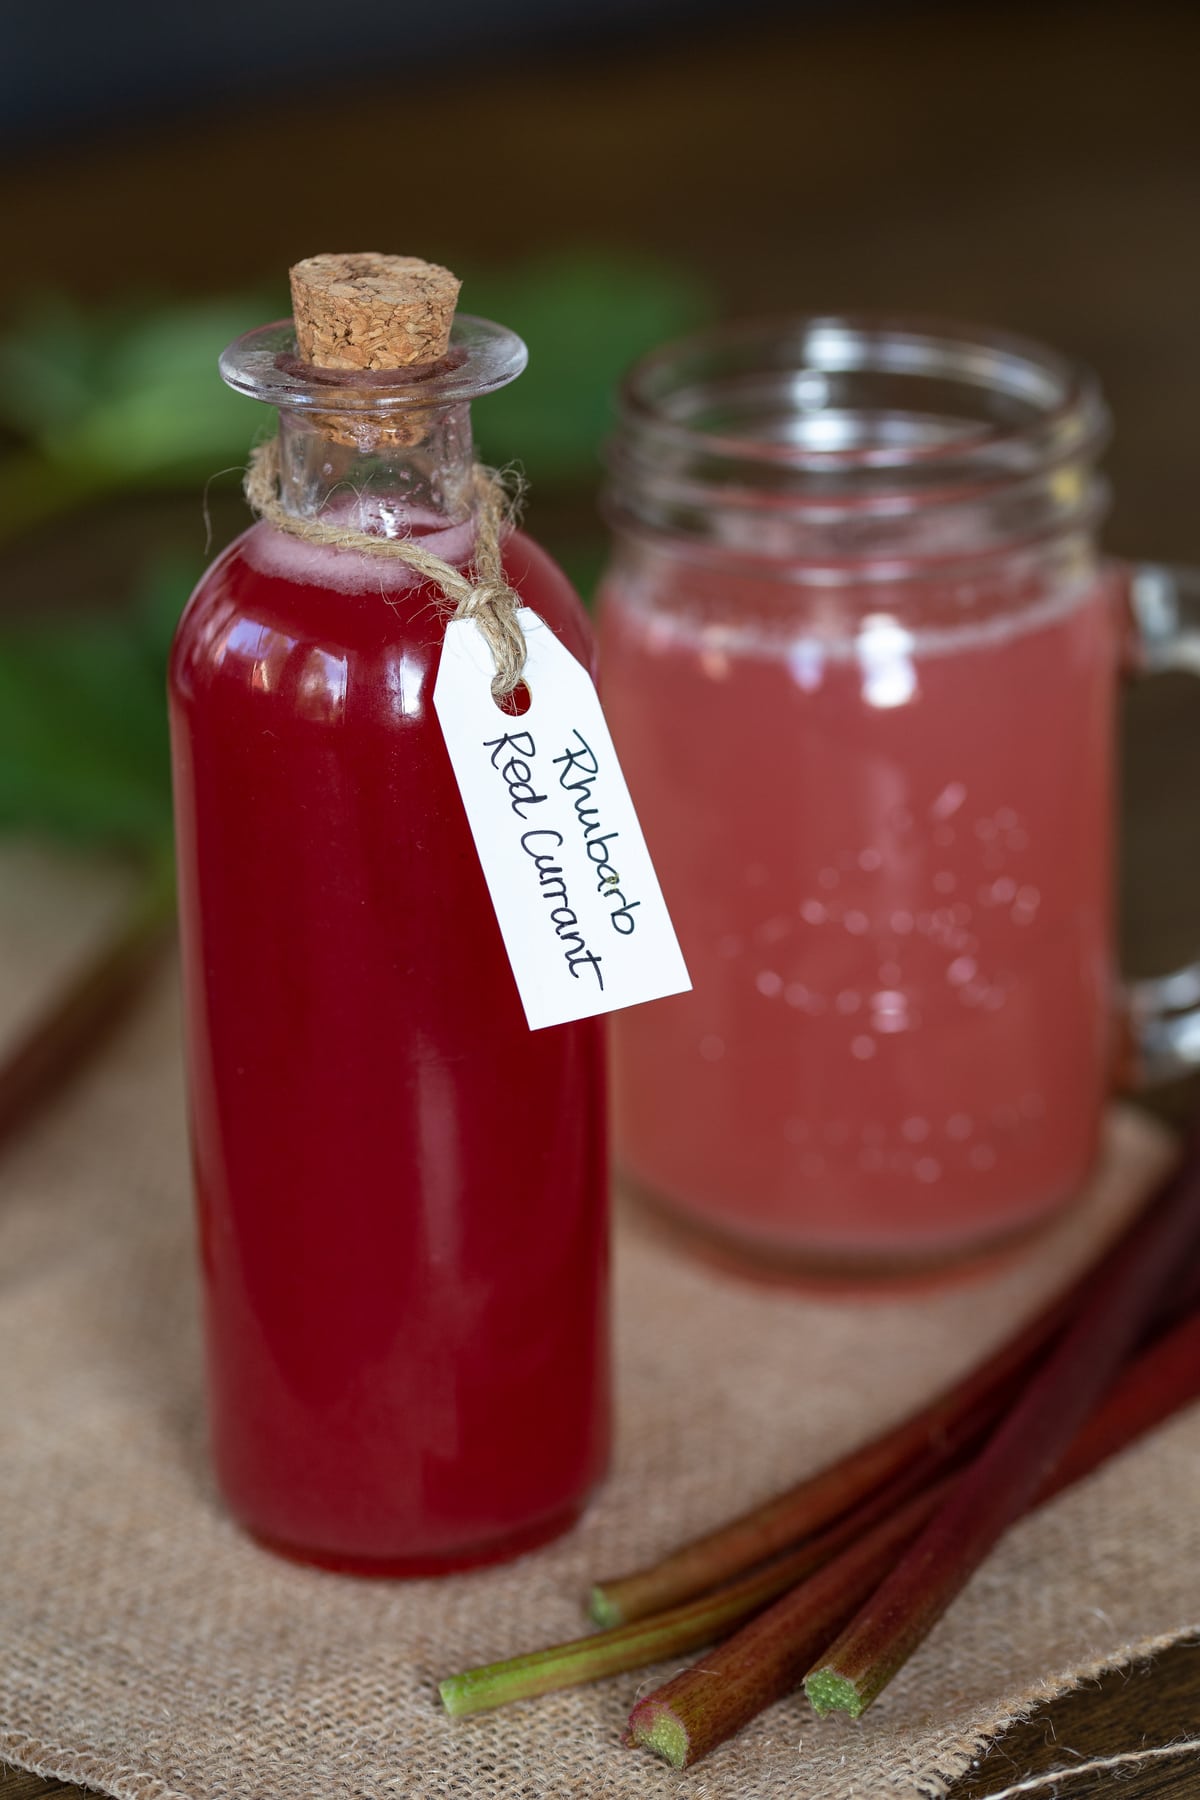 Rhubarb syrup in a bottle, diluted with water in a glass.